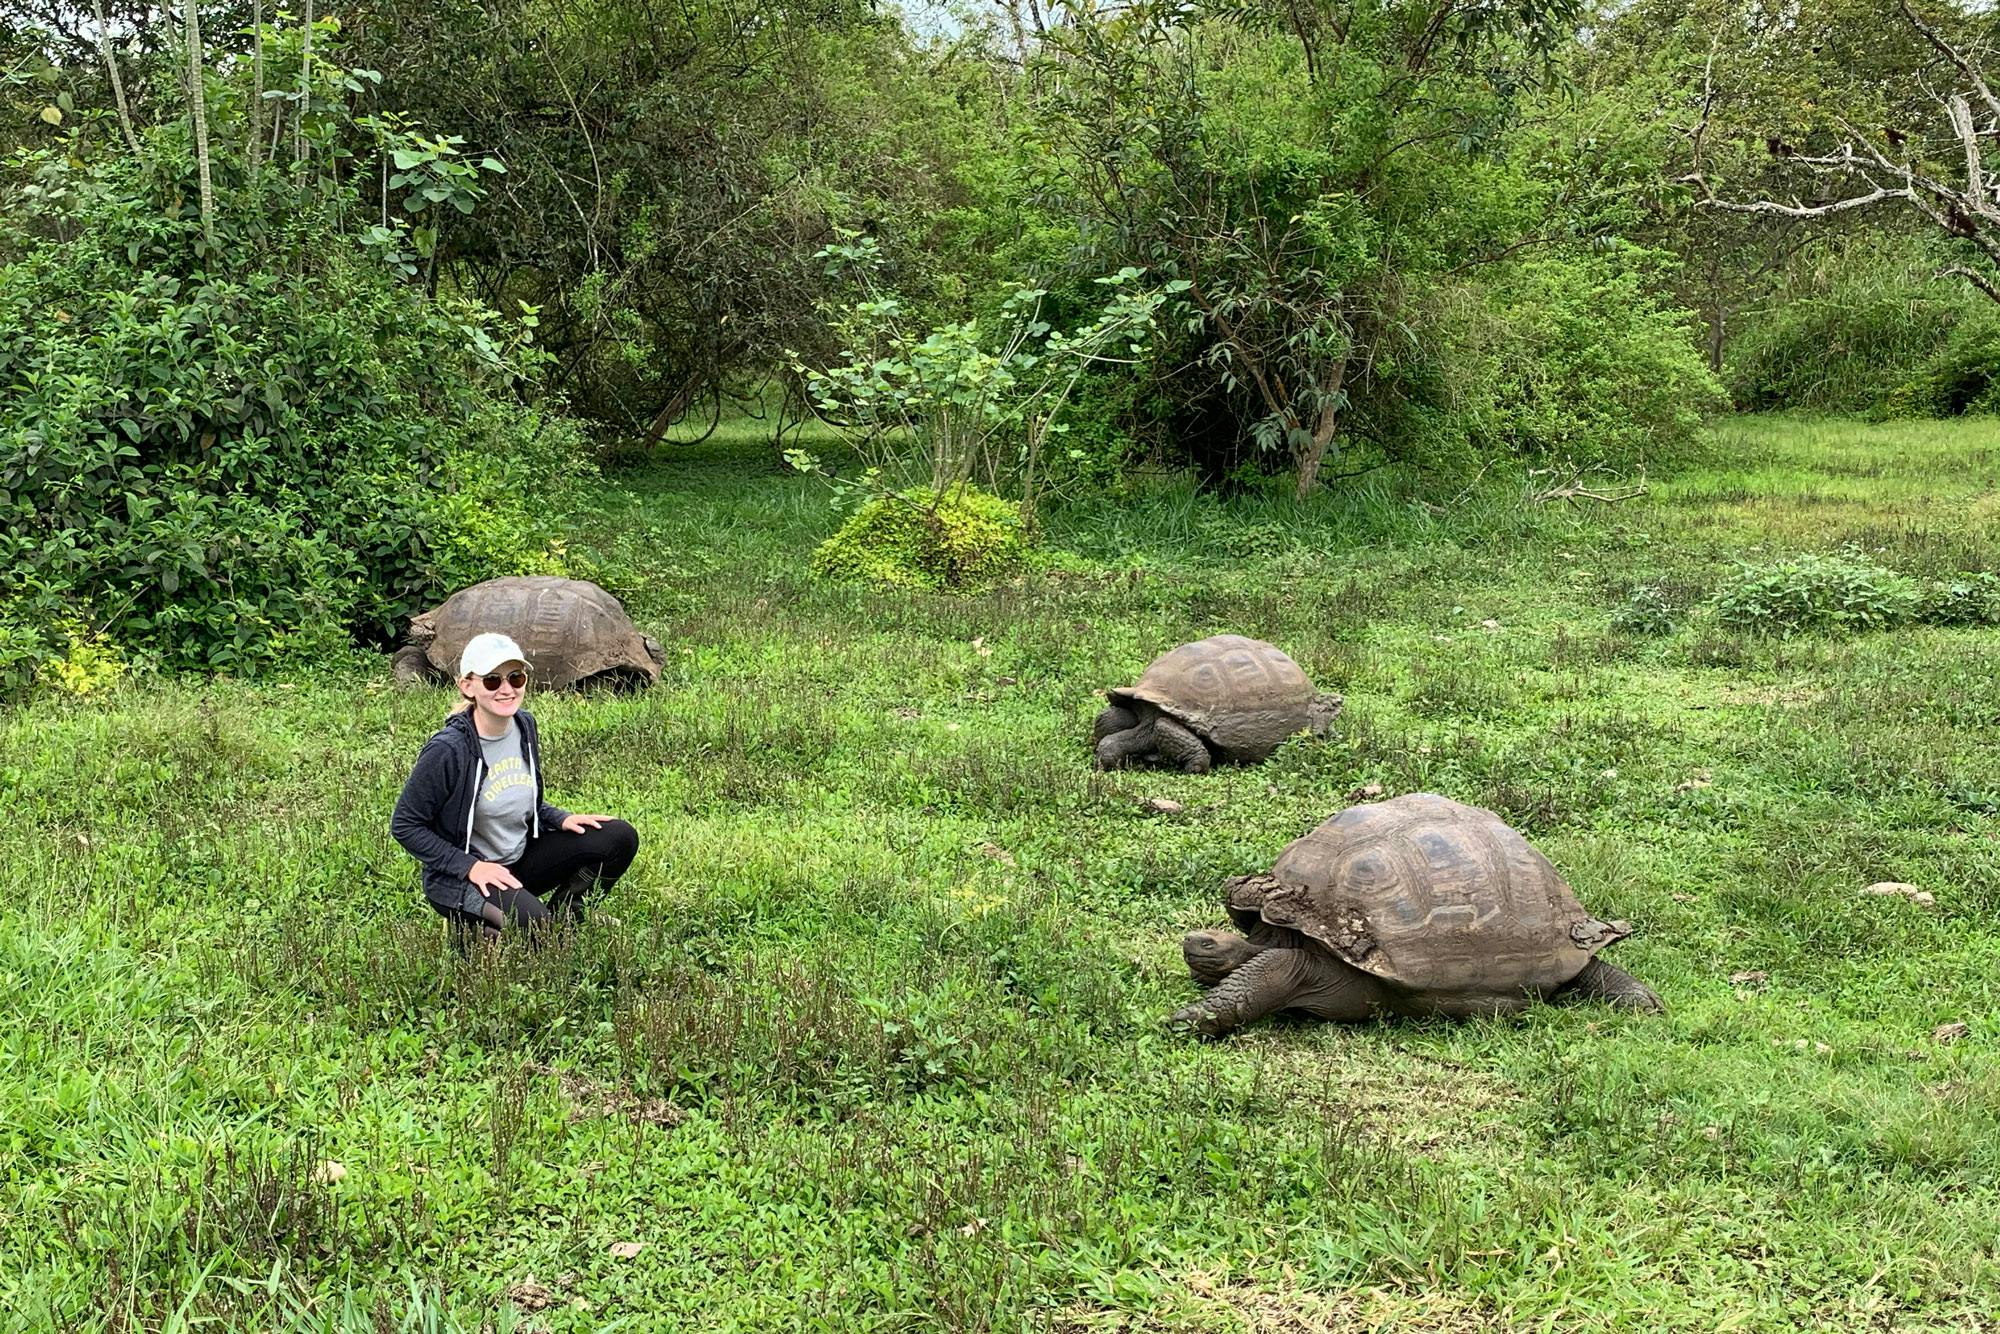 Molly Butler crouches in the grass near three Galapagos giant tortoises.